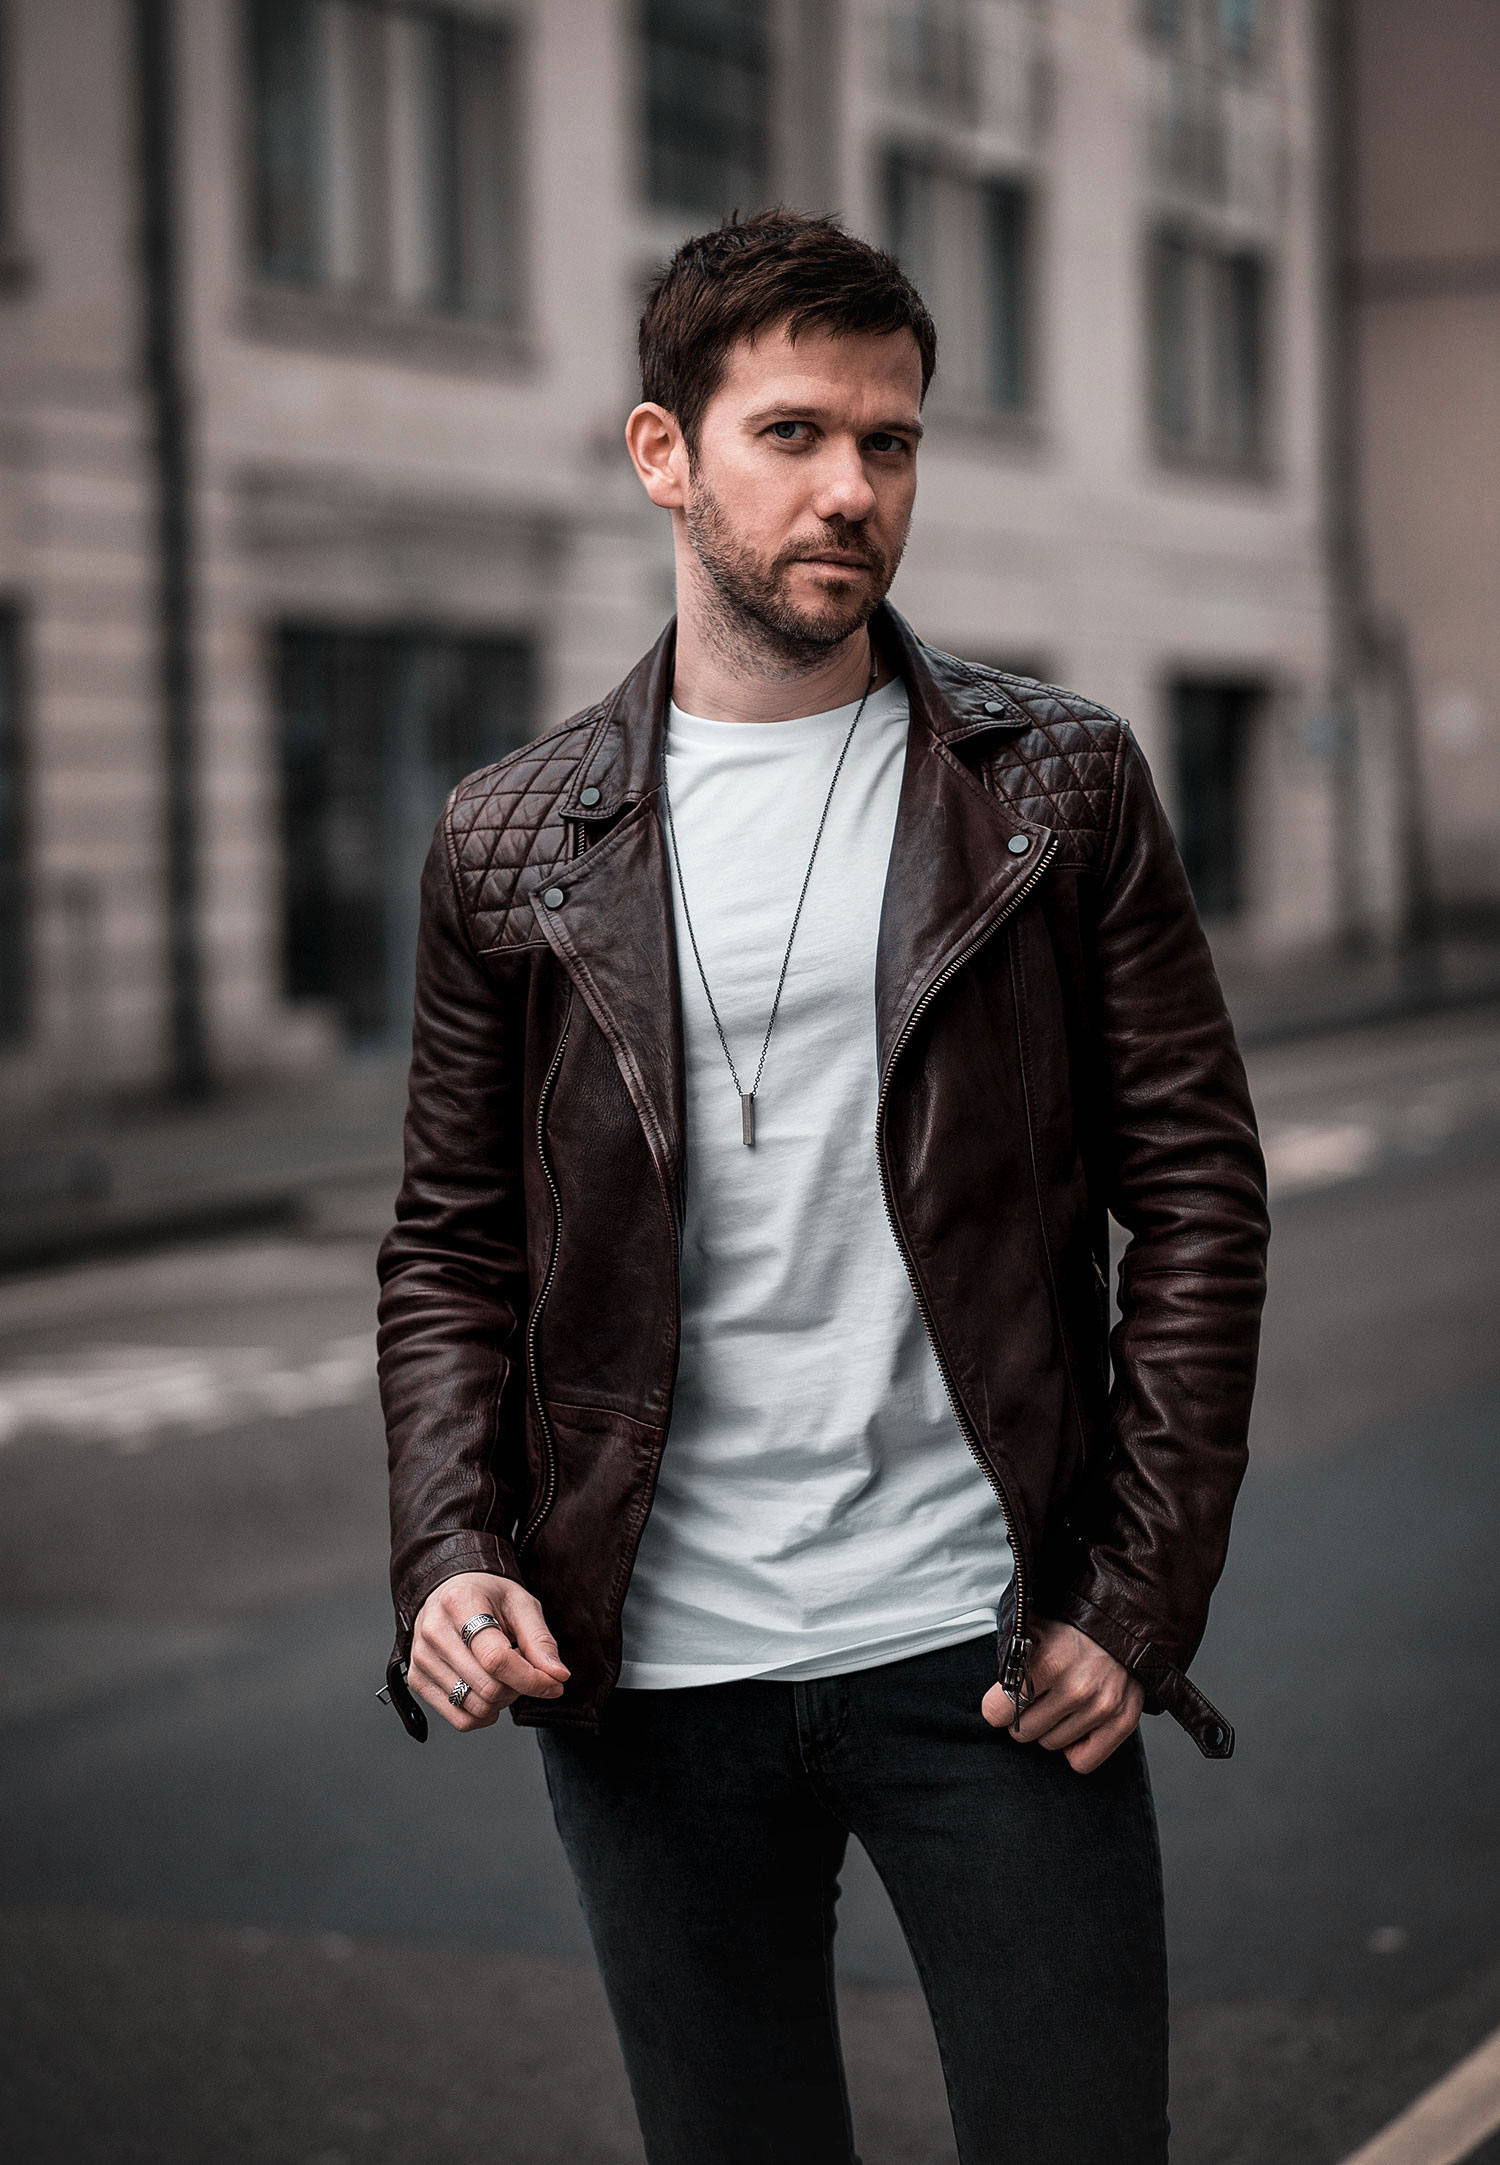 Allsaints Conroy Burgundy Leather Jacket Outfit - Your Average Guy